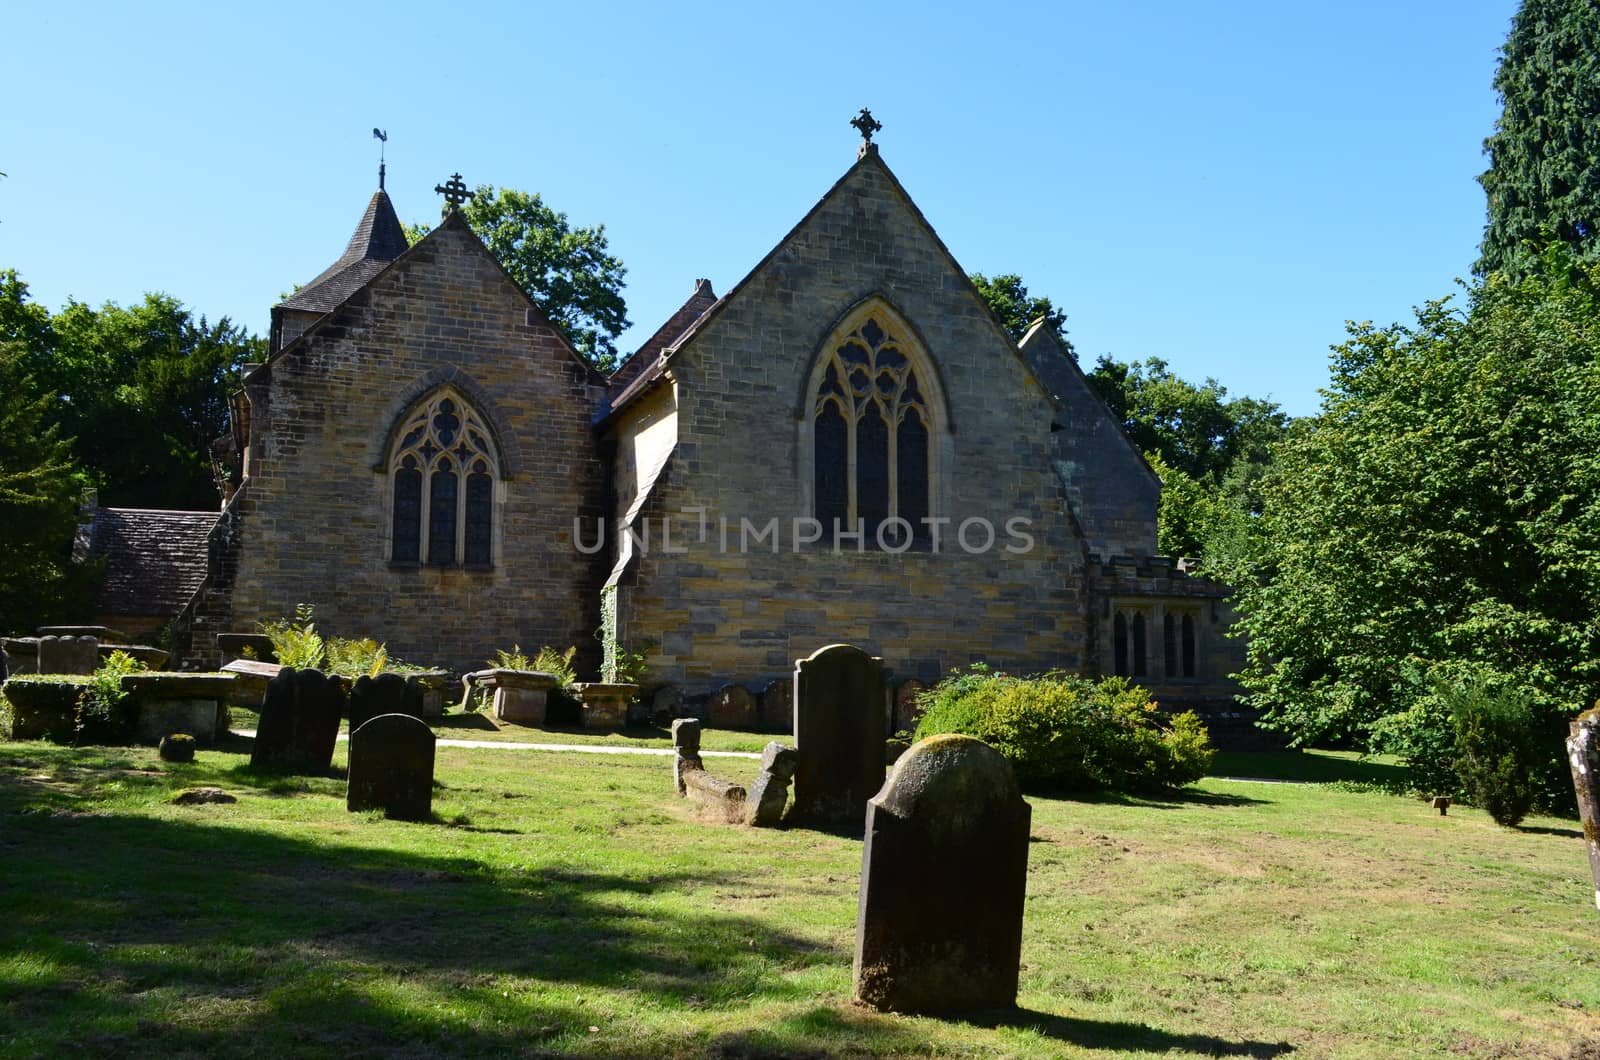 St Mary's church in the village of Balcombe,Sussex,England,Grade 1 listed due to its historical interest.